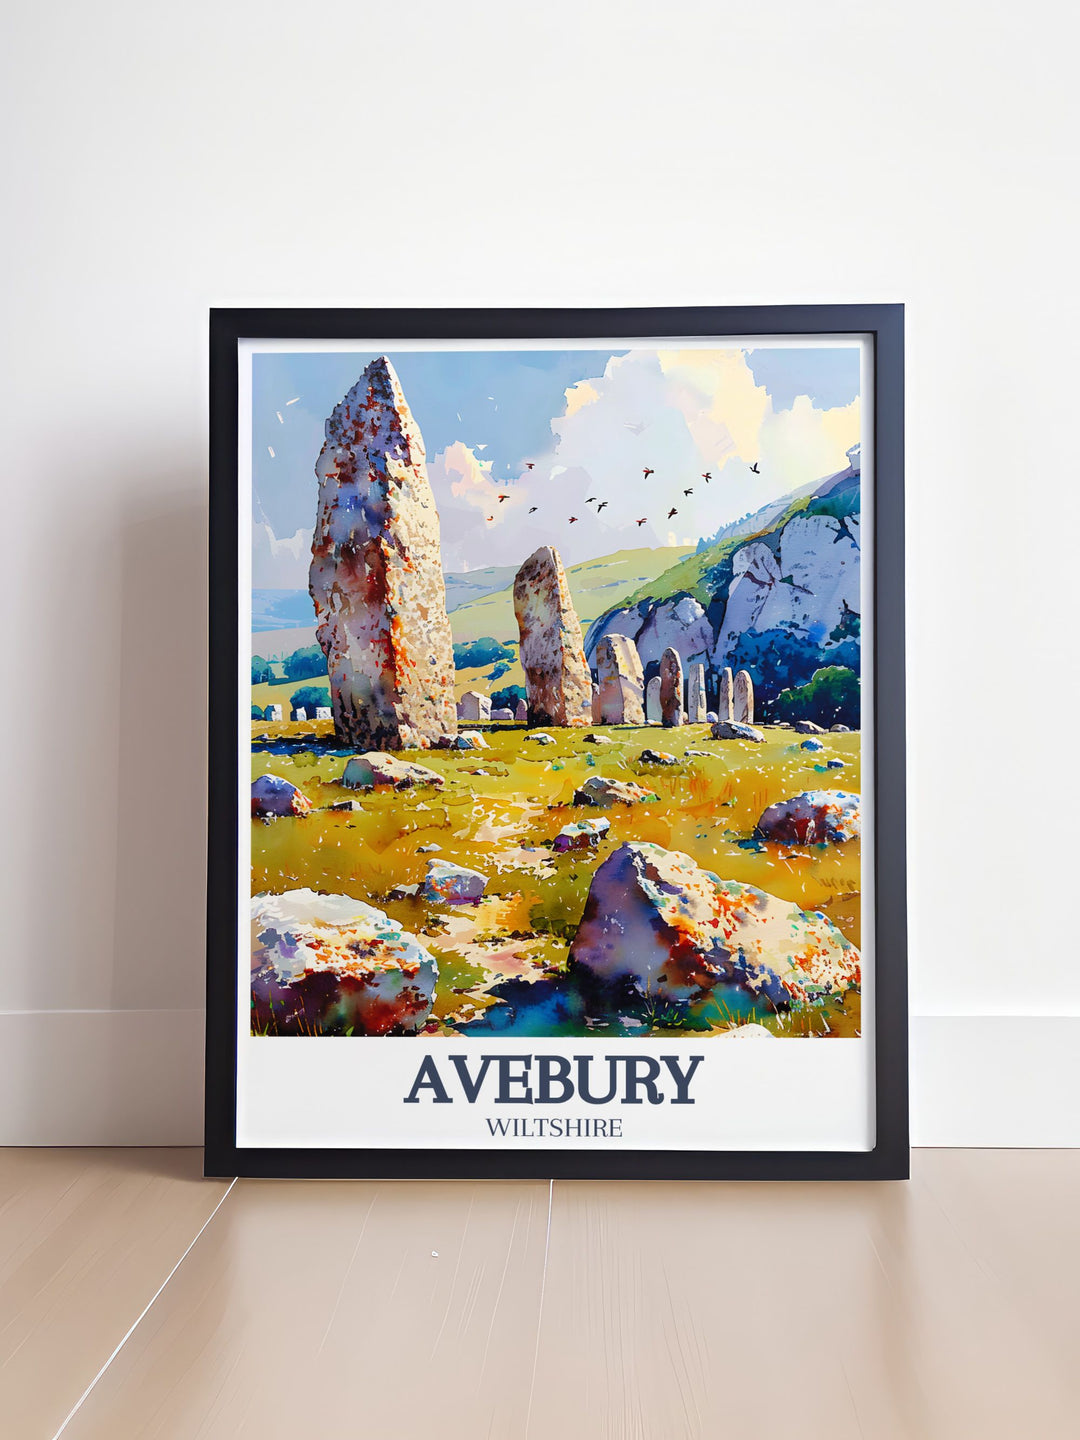 This vibrant travel poster showcases the untouched beauty of the North Wessex Downs, highlighting its diverse landscapes and rich history, perfect for adding a touch of the UKs natural wonder to your walls.